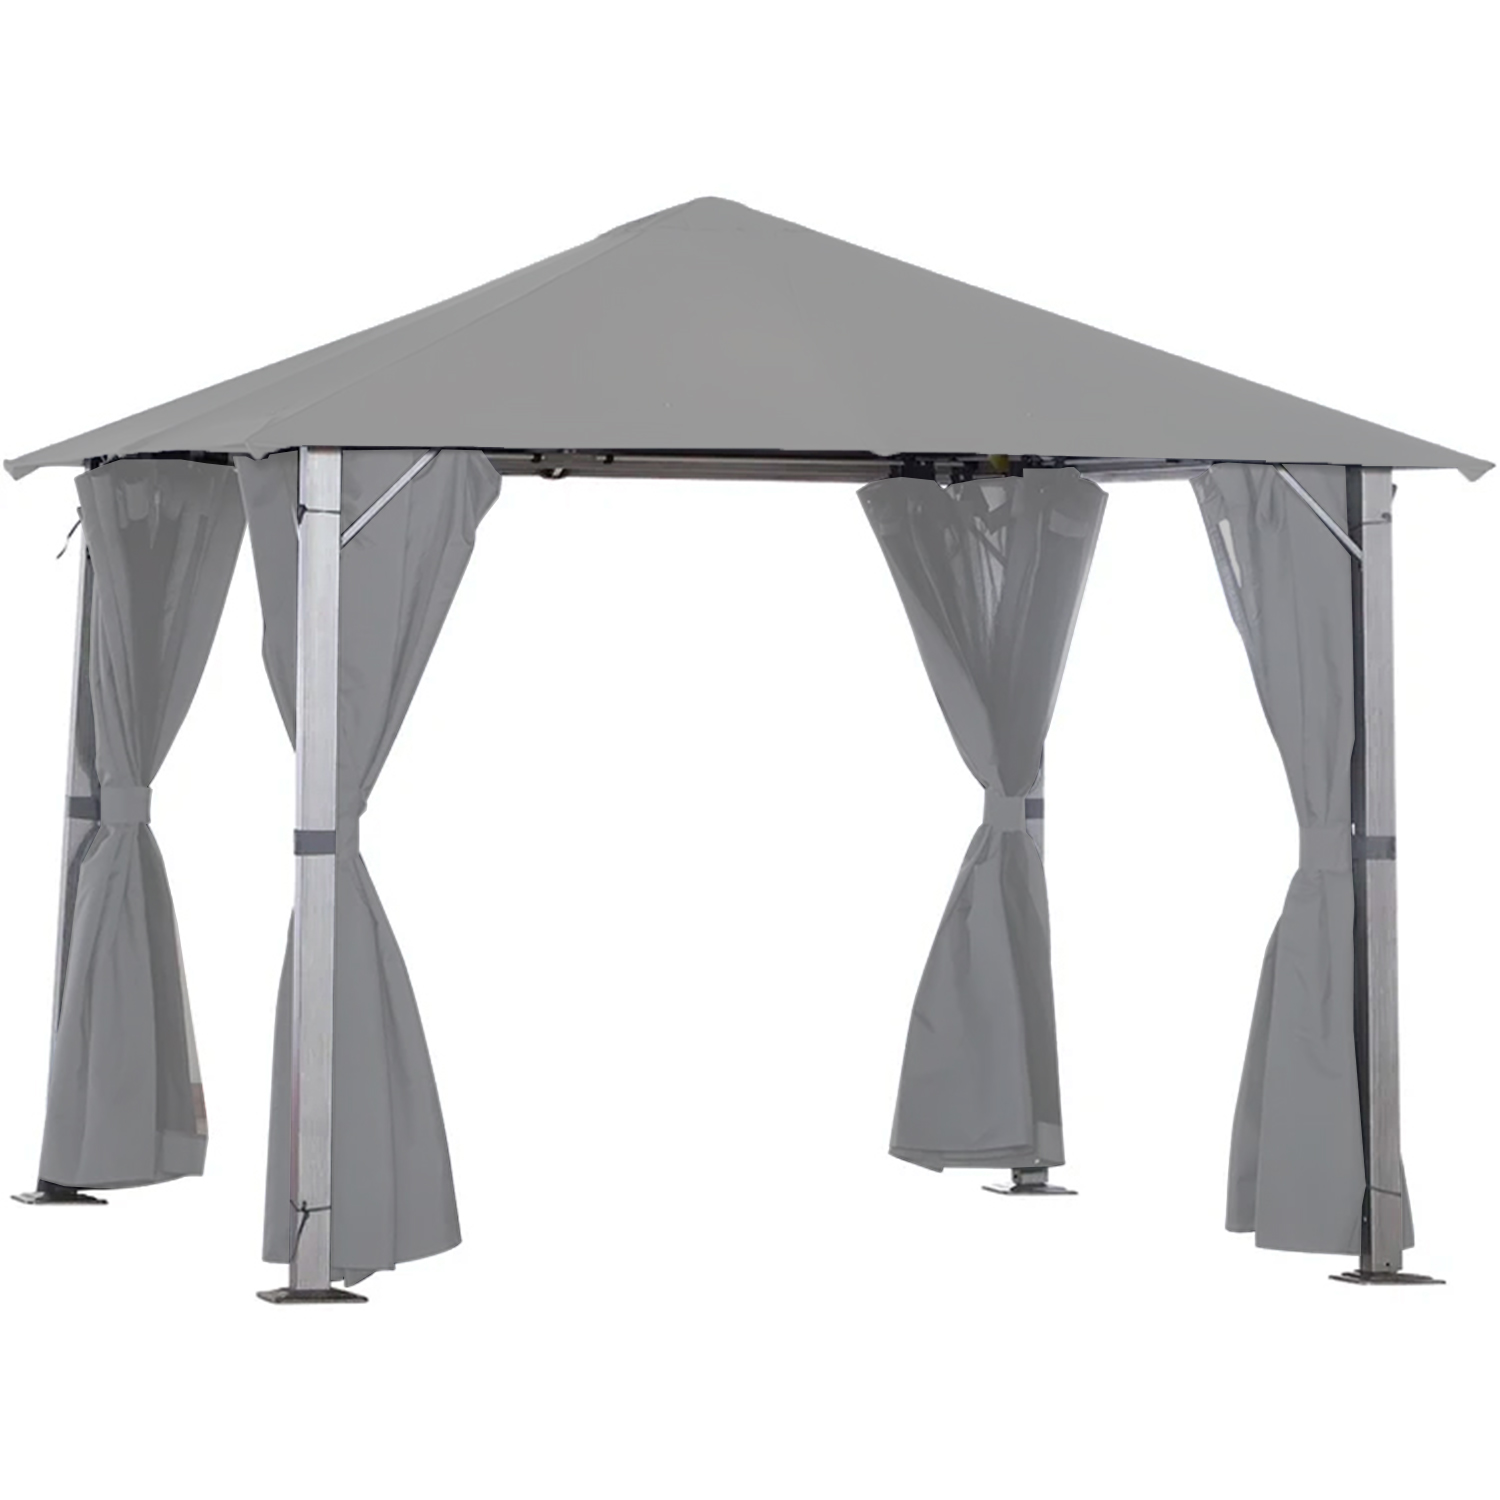 Replacement Canopy for 84C-164 Gazebo - Riplock 350